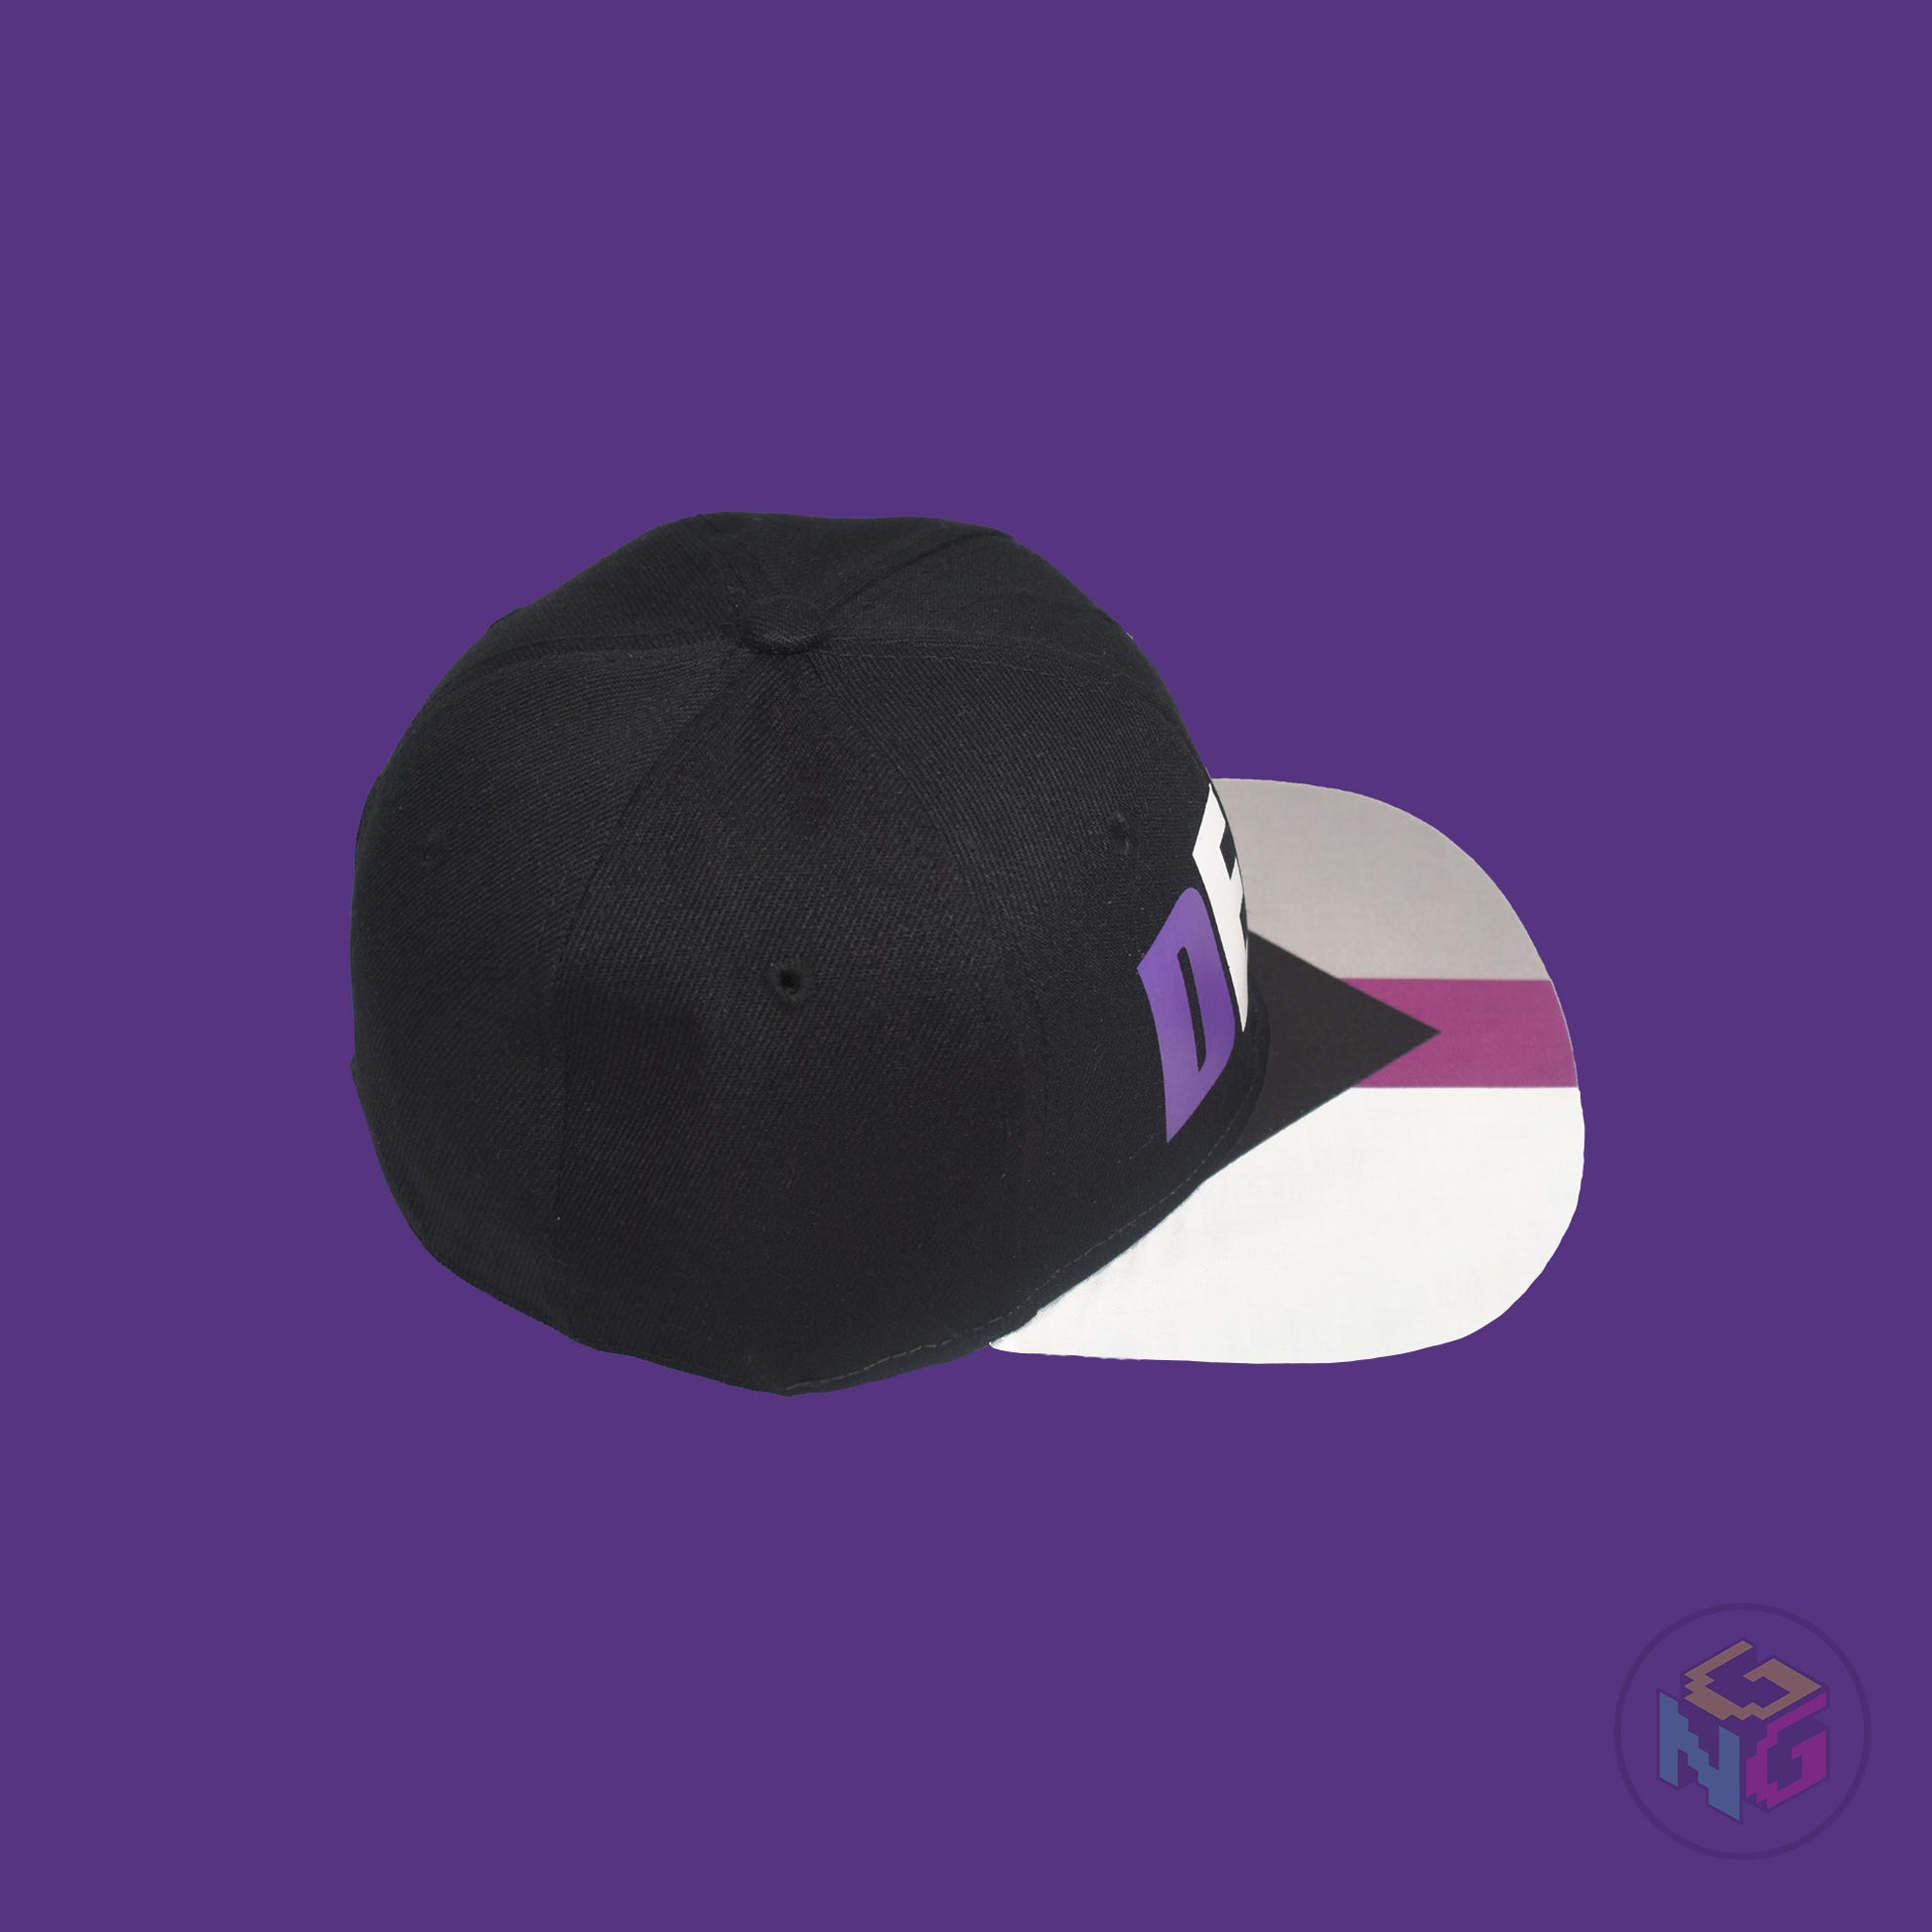 Black flat bill snapback hat. The brim has the demisexual pride flag on both sides and the front of the hat has the word “DEMI” in purple, white, and grey. Top right view